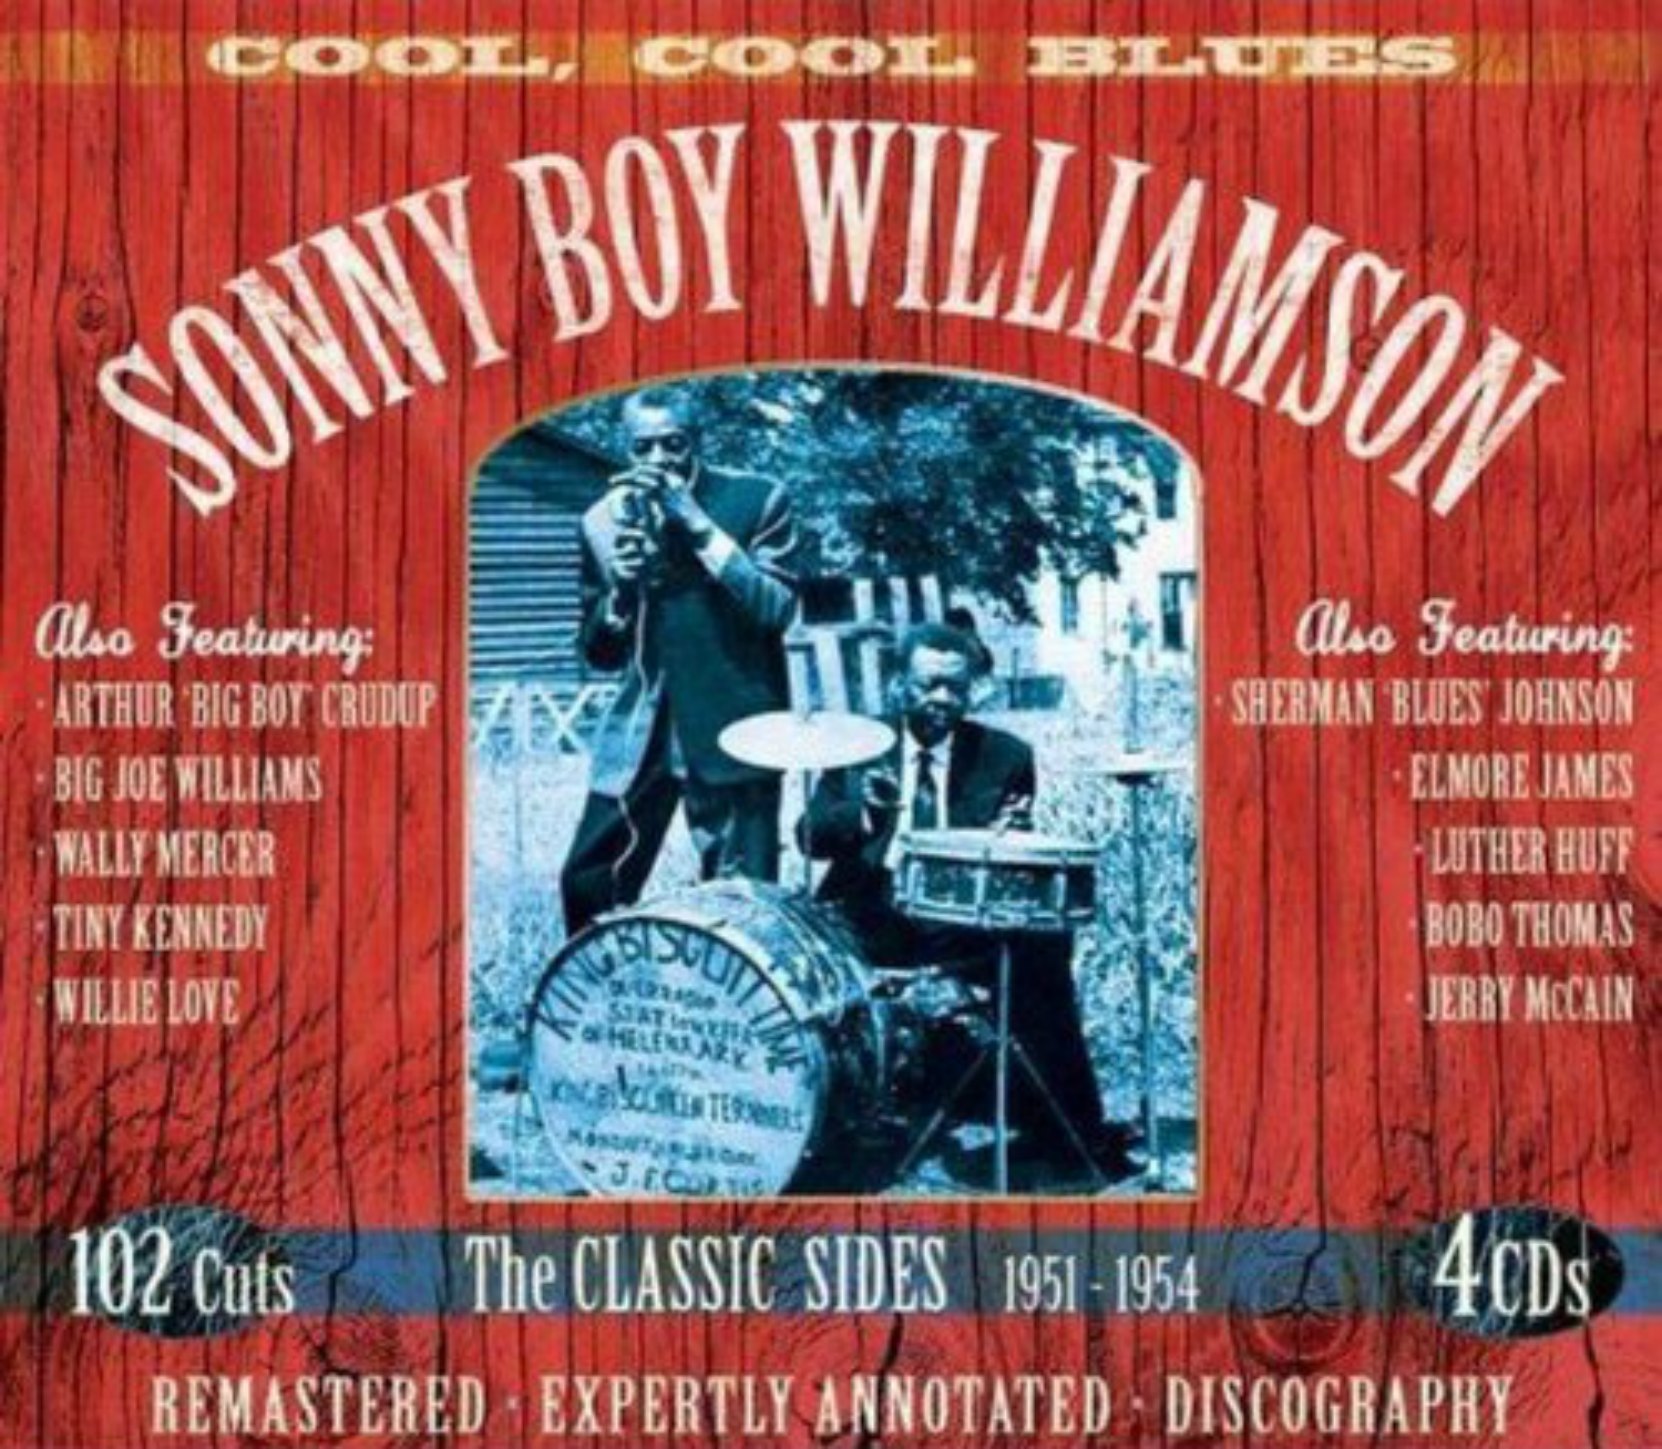 CD cover, Sonny Boy Williamson - Cool, Cool Blues, a 4CD compilation of Trumpet Records releases from JSP Records